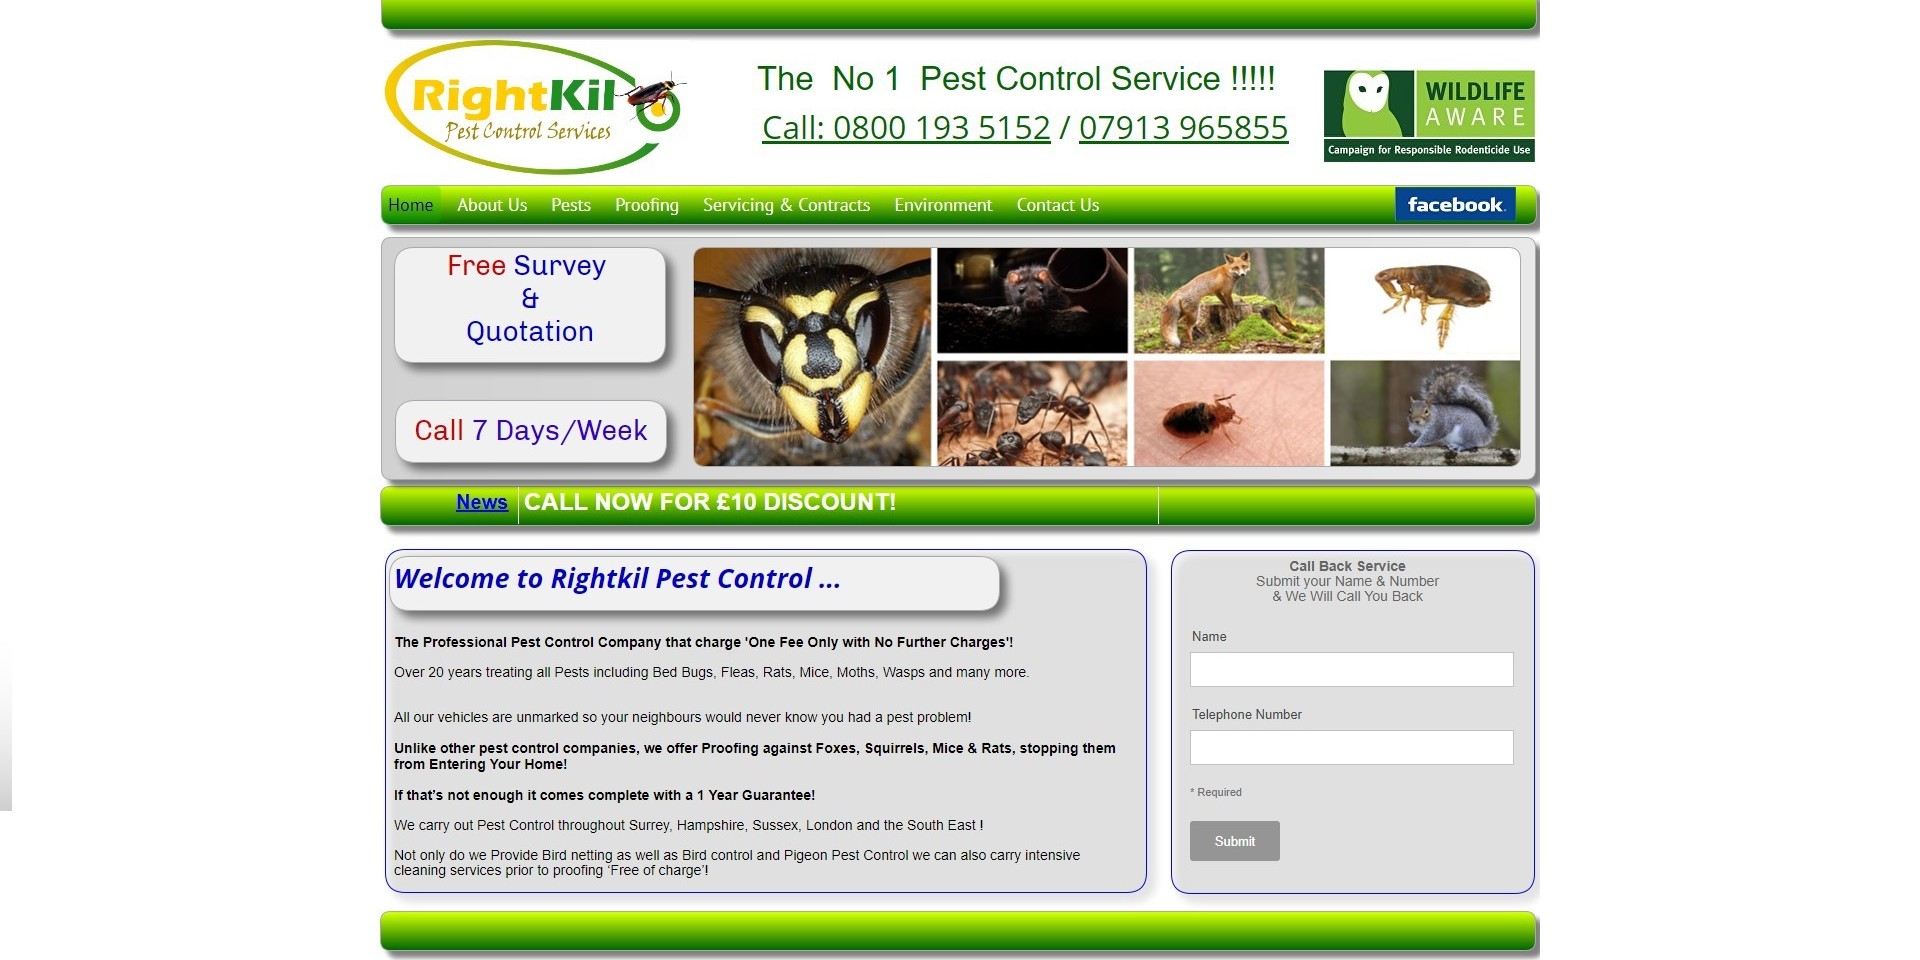 The previous Rightkil website, displayed on desktop